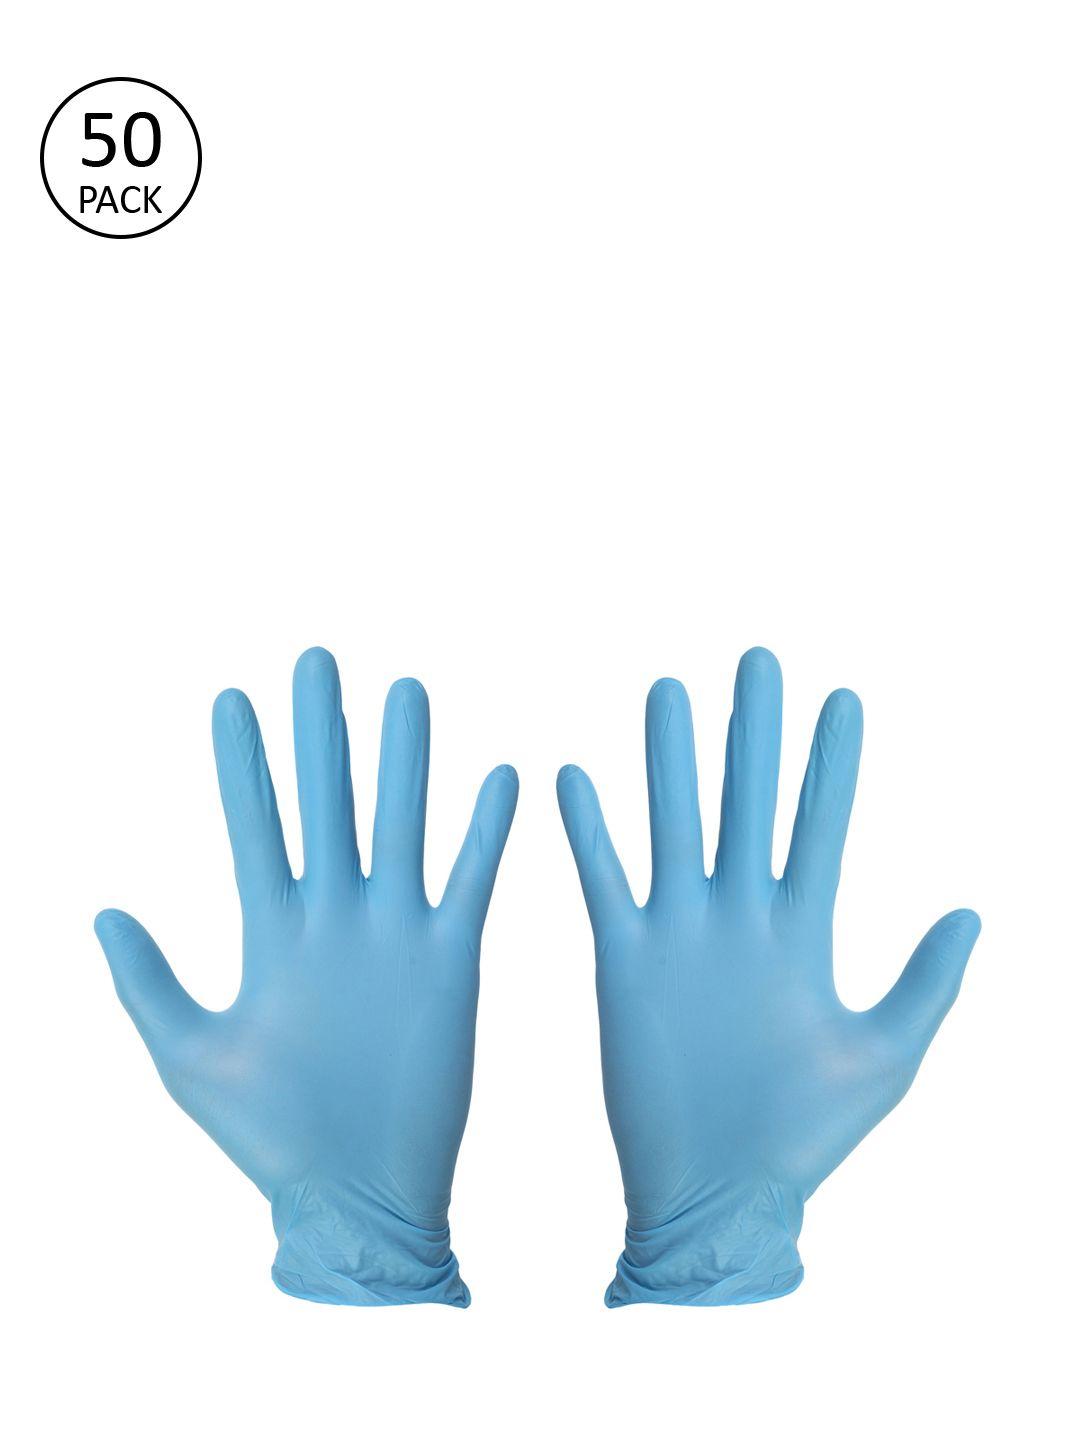 london fashion hob unisex pack of 50 blue solid surgical disposable hand gloves